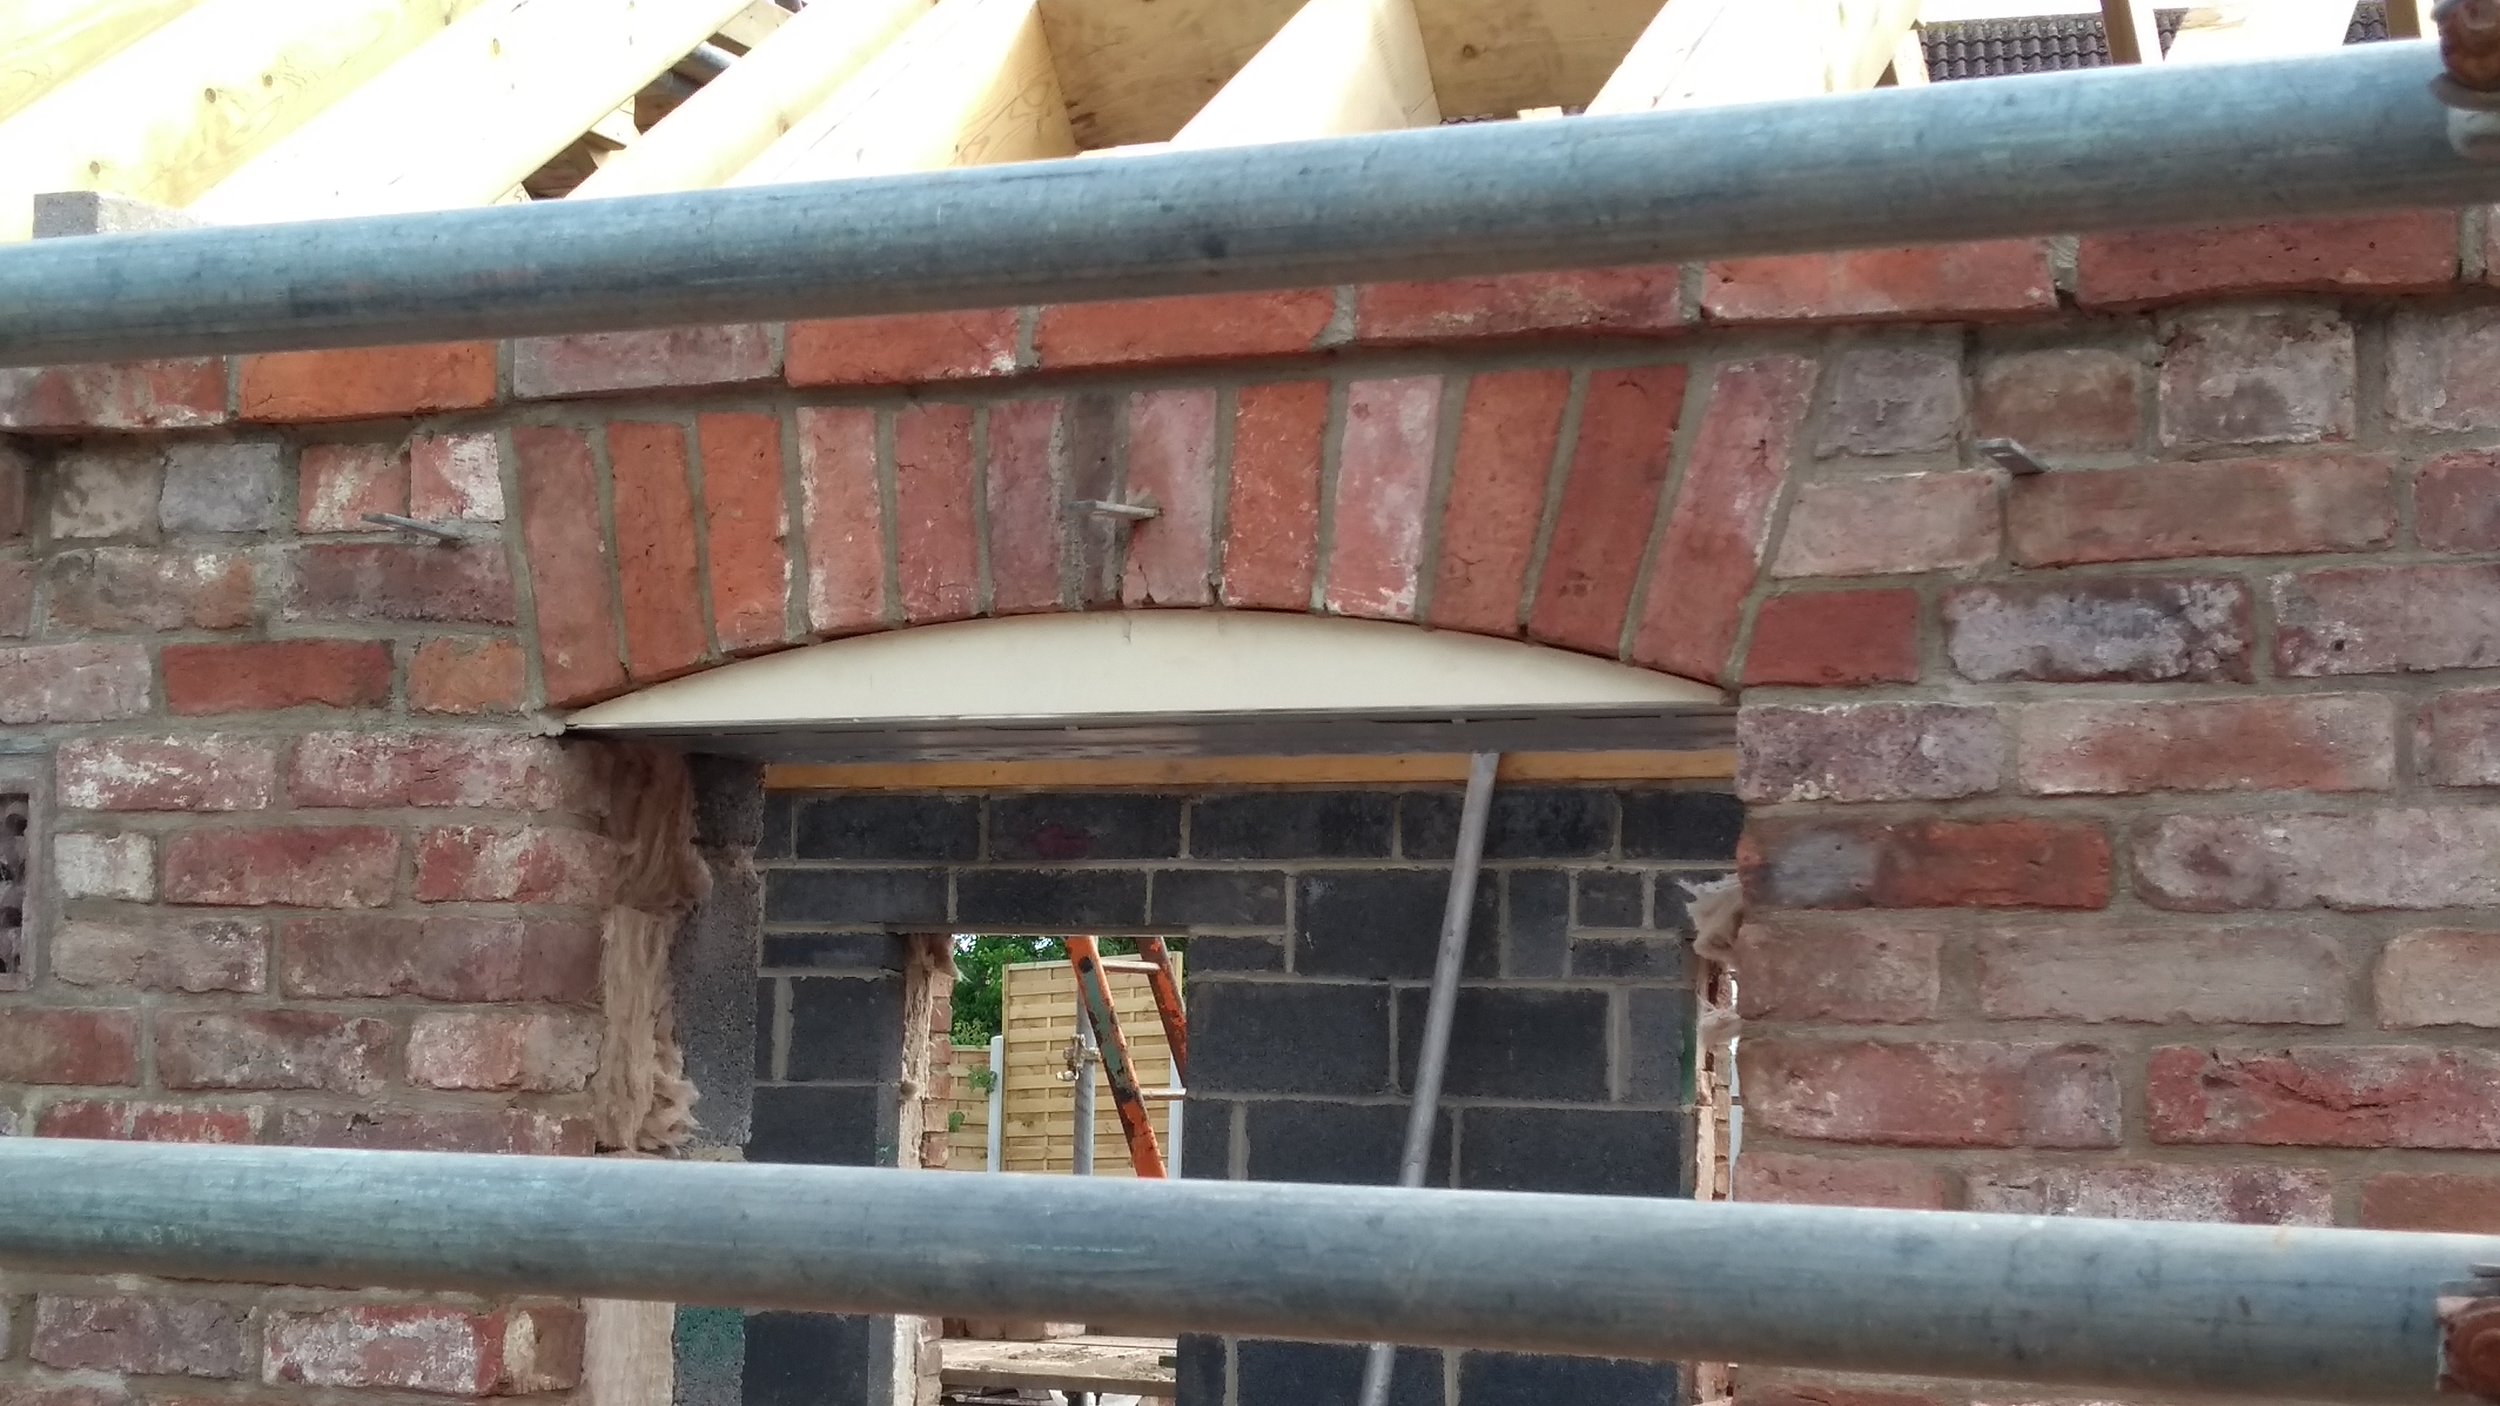  Detail of the brick arch and window cambered head (see, I even know the technical terms!) 